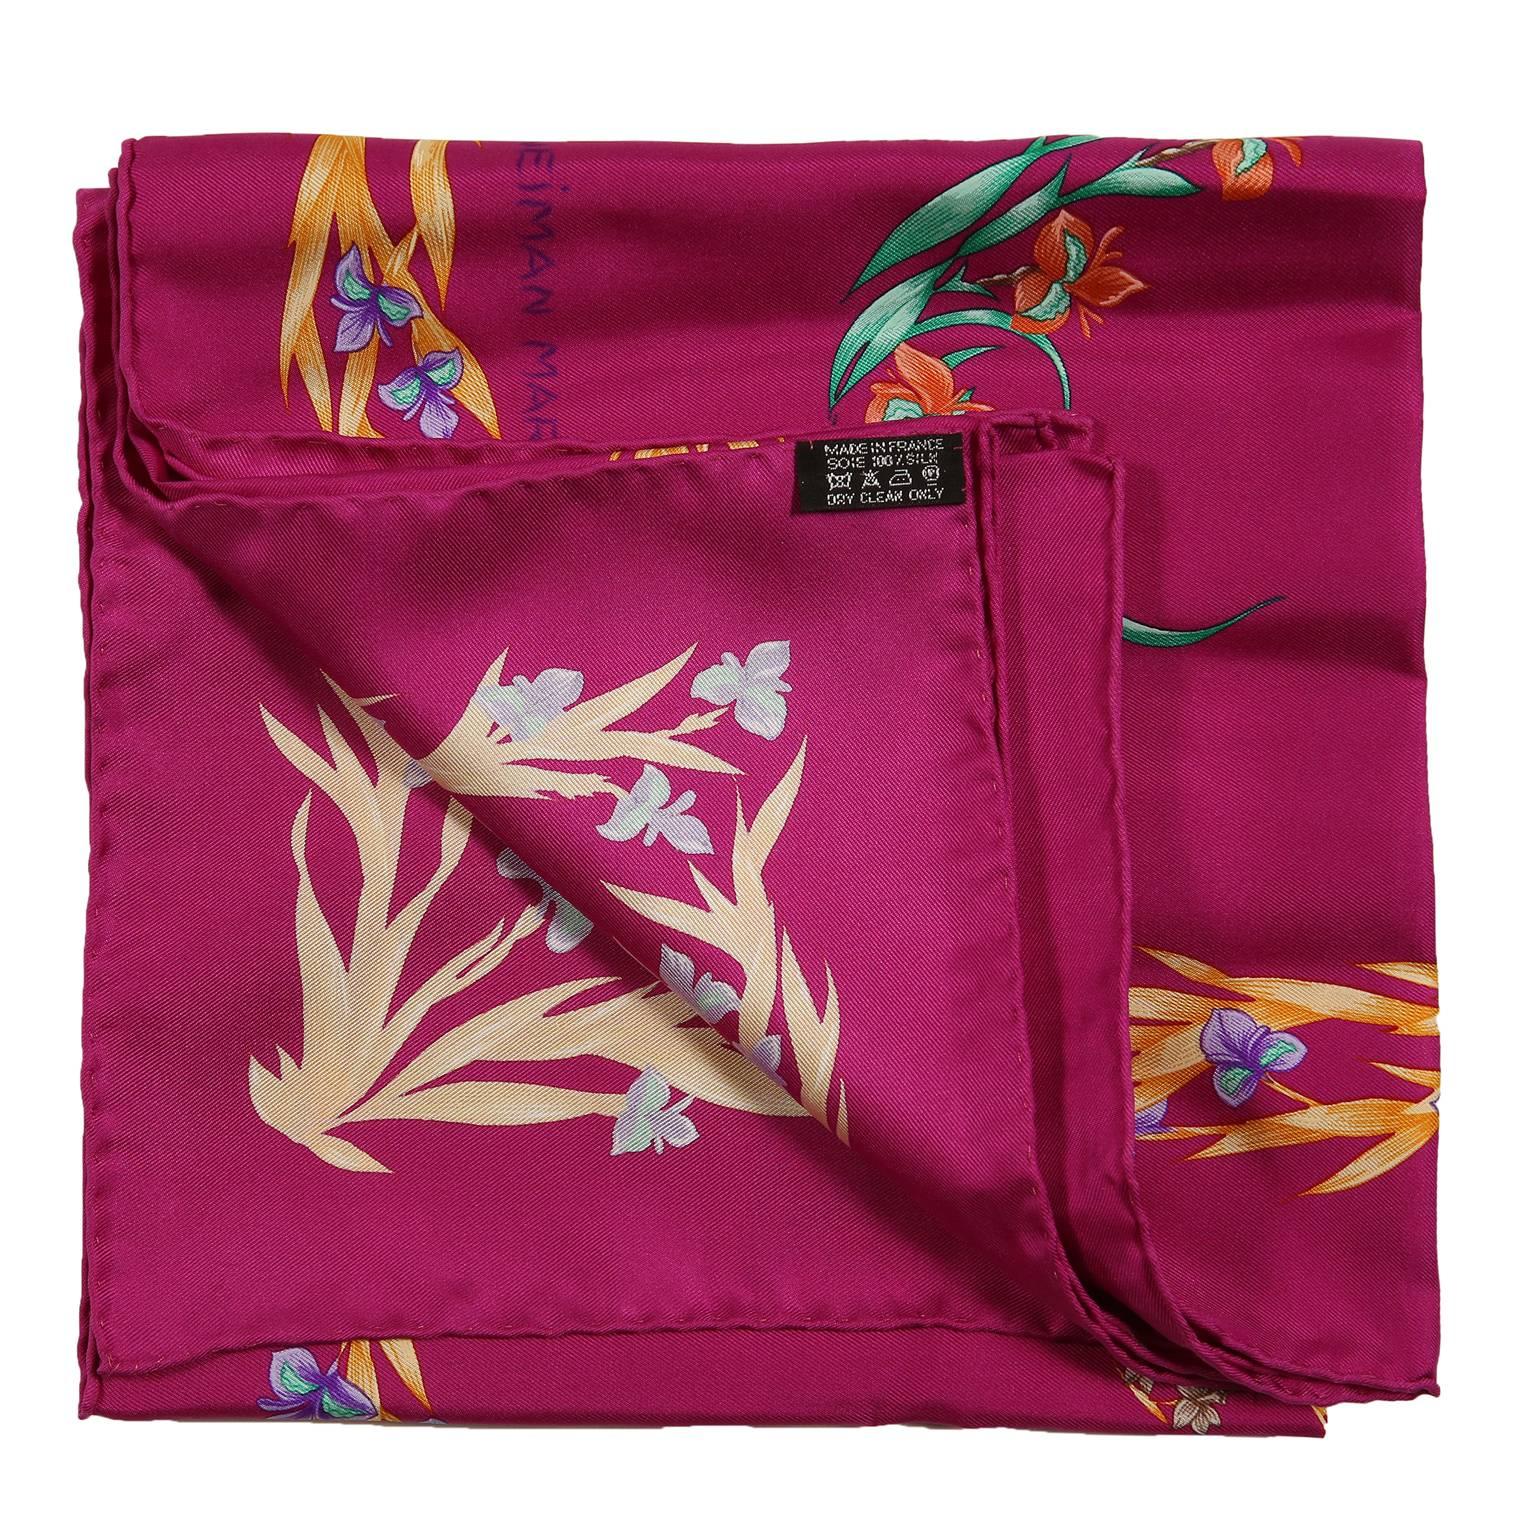 This authentic Hermès Cheval Fleuri 90 cm Silk Scarf is pristine.  A  Limited Edition reissued in 2007 to commemorate the 100th anniversary of Neiman Marcus, originally issued in 1962 and designed by Henri d’Origny. 
Fuchsia background with